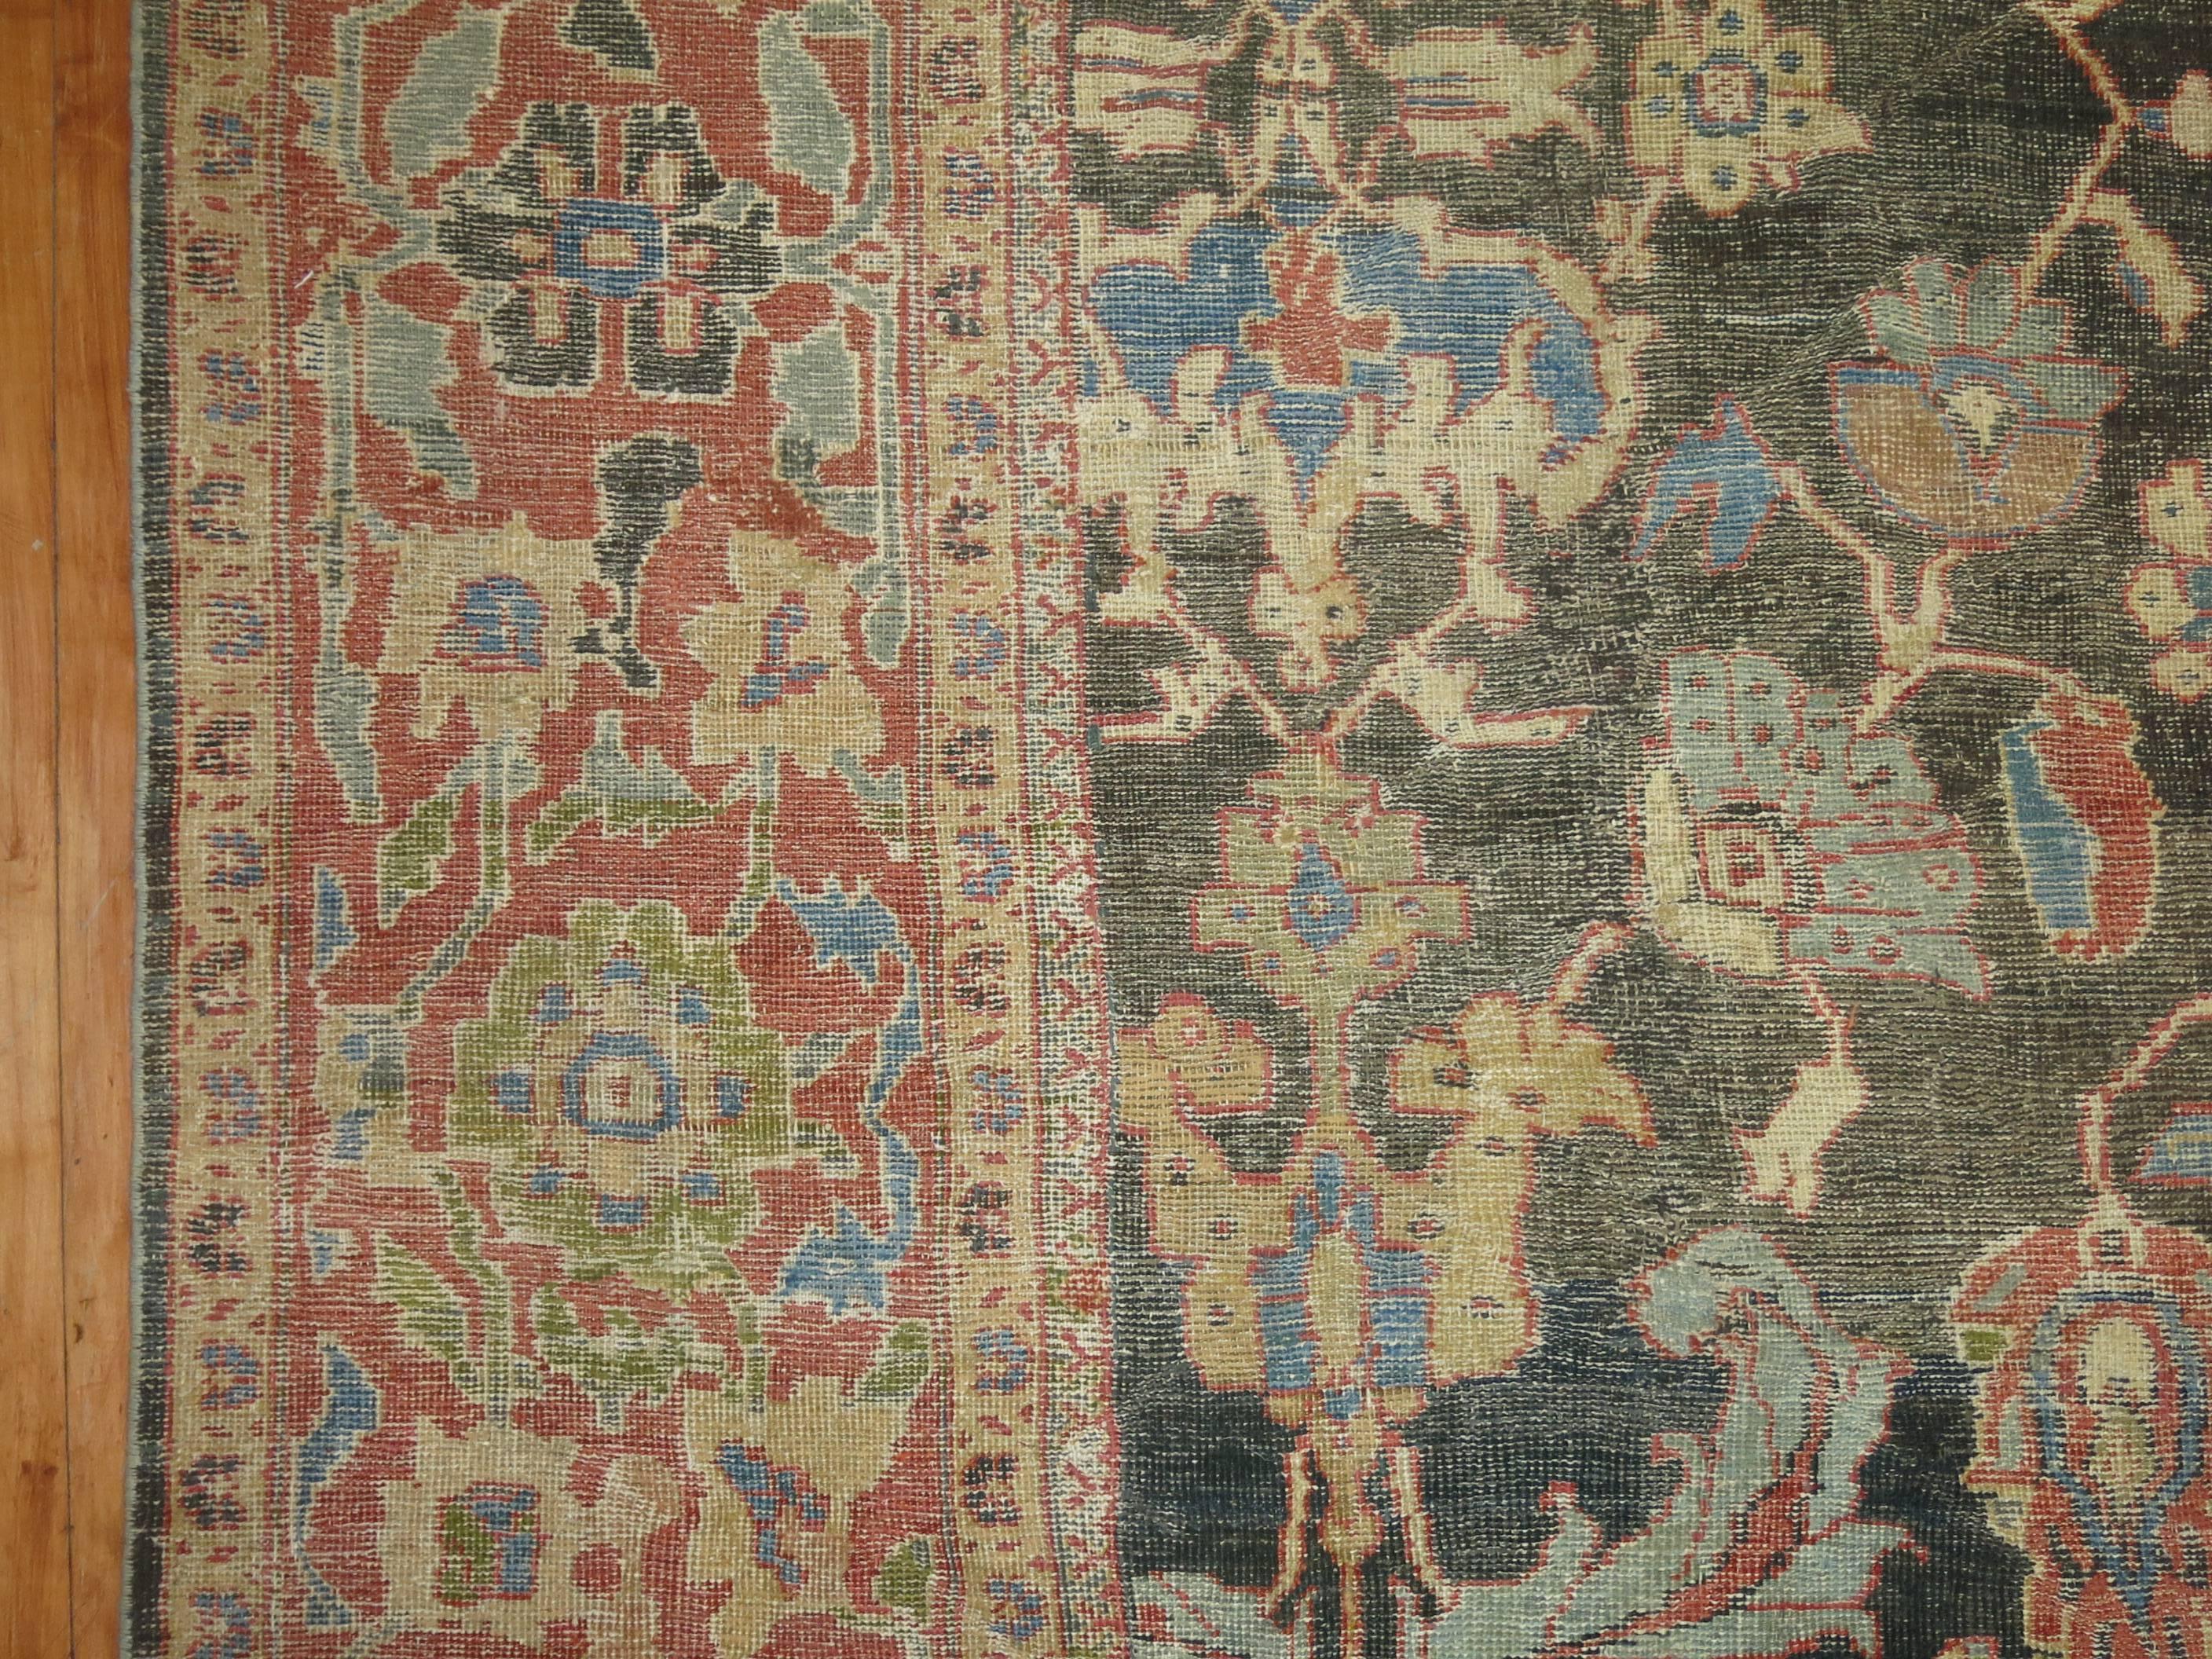 Hand-Woven Antique Persian Sultanabad Mahal Carpet